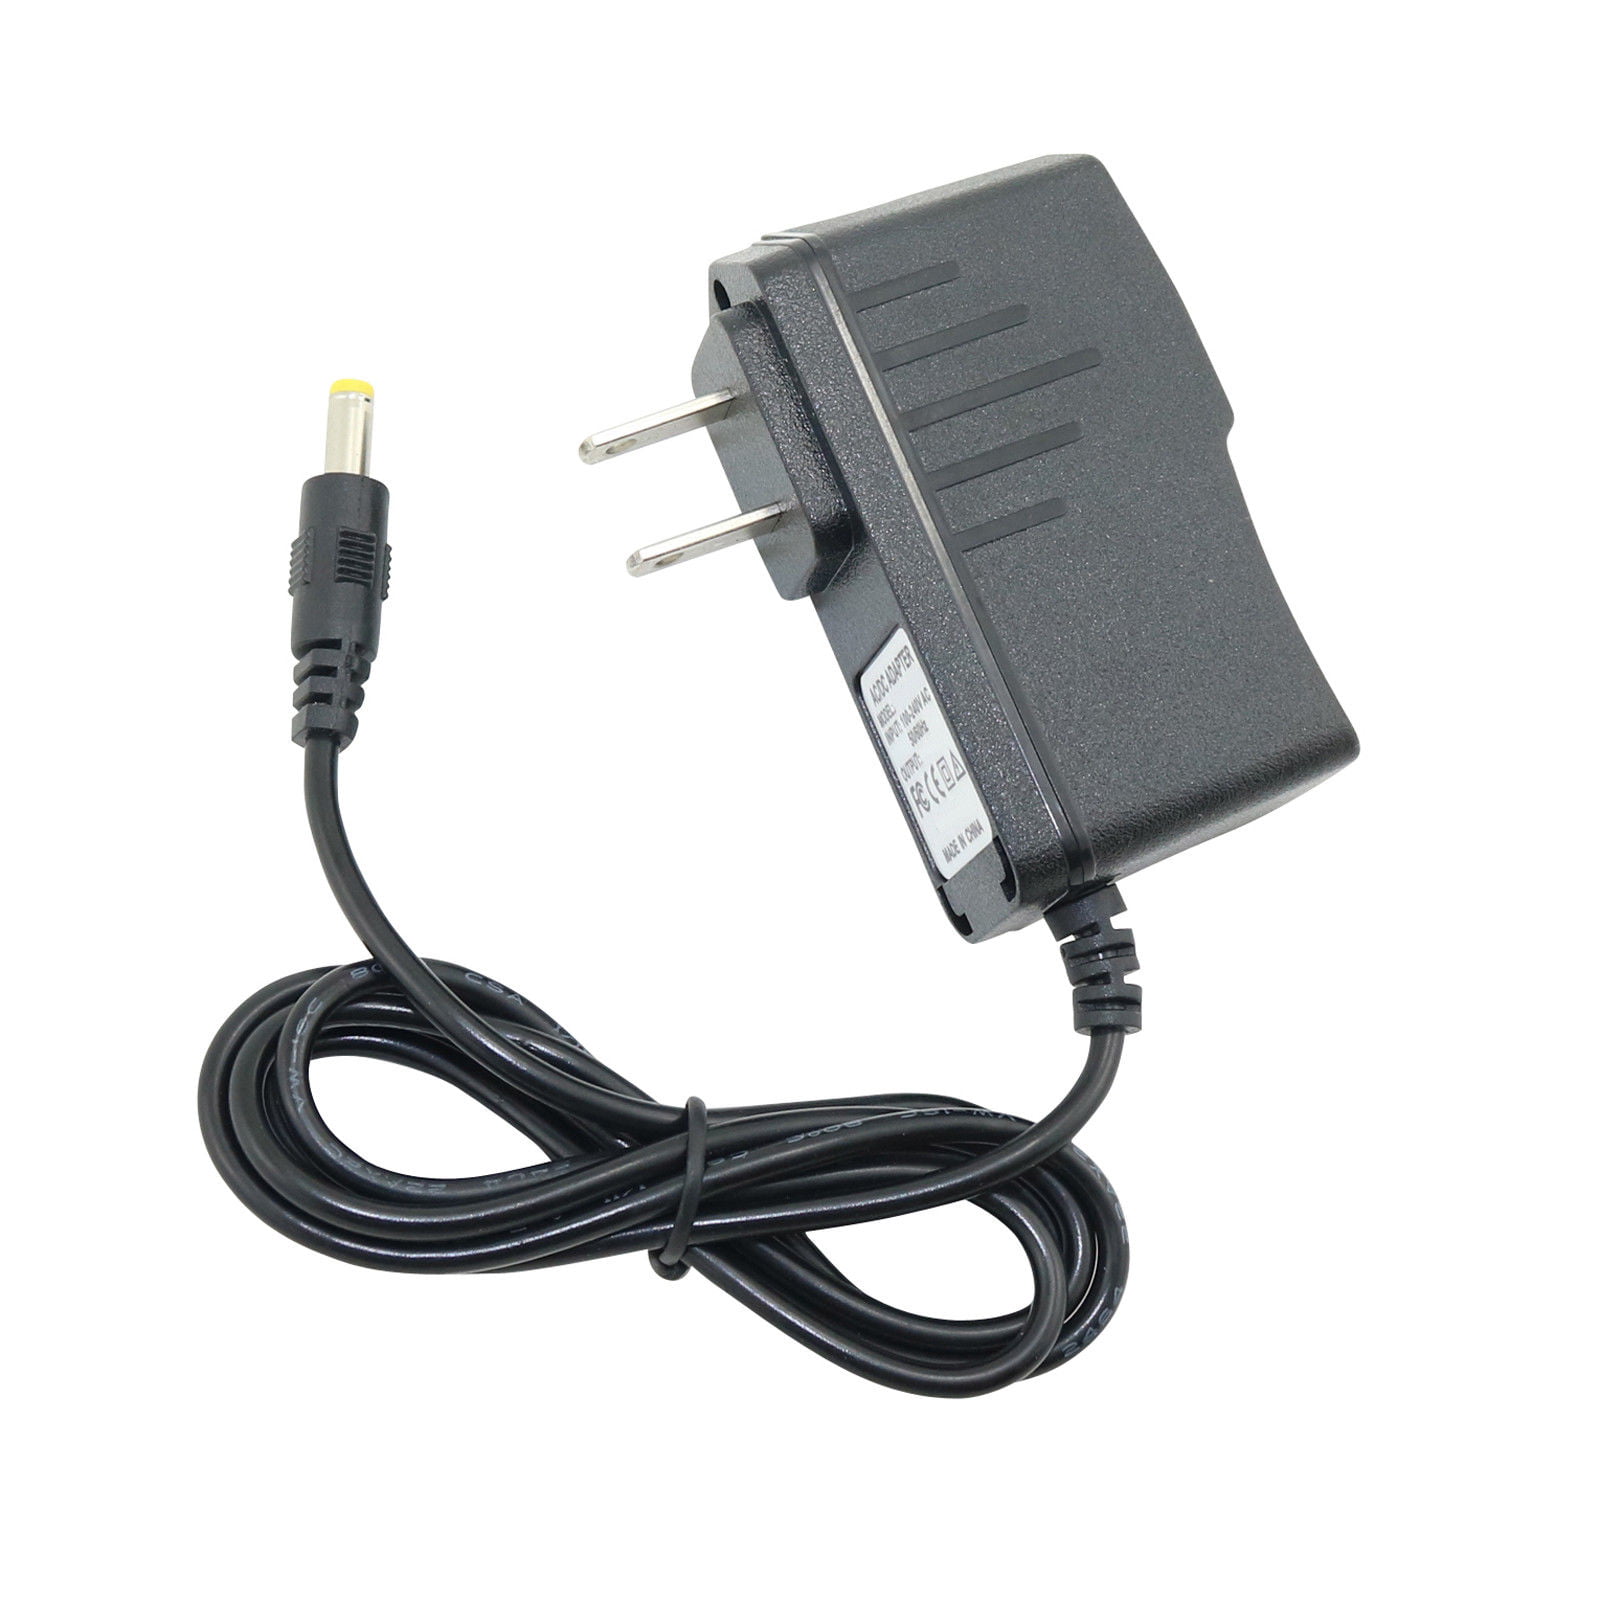 AC Adapter Power Supply for Rosewill RNX-EasyN400 Wireless-N Broadband Router